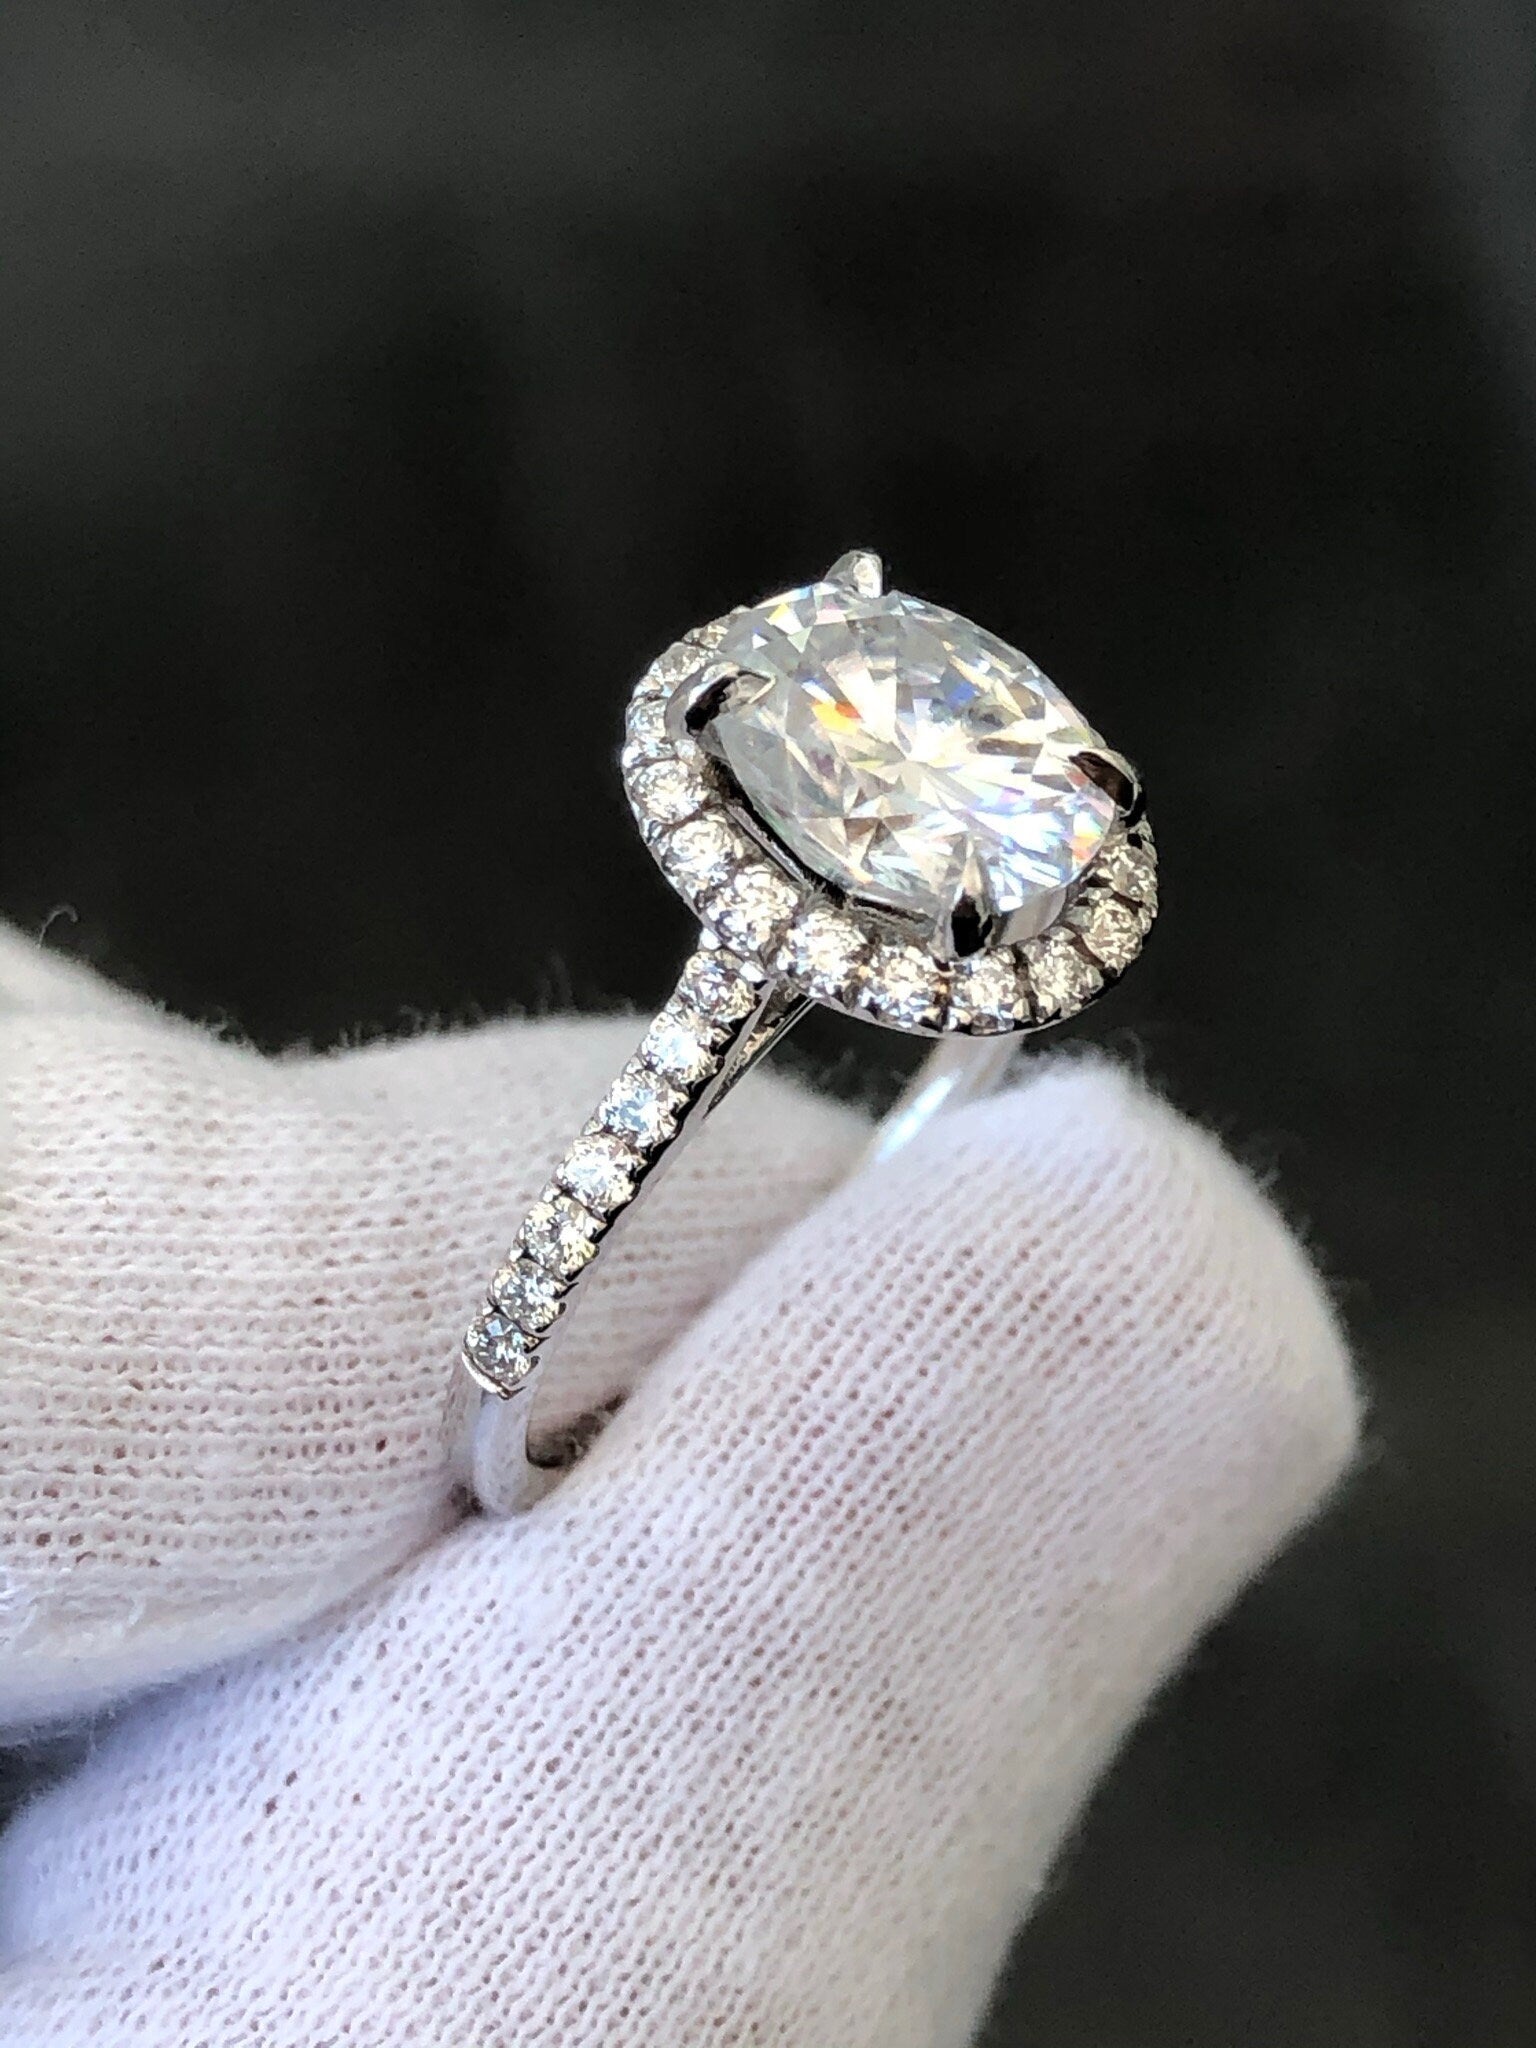 LIV 14K White Gold & Diamonds Pave Halo With a 2ct Oval Moissanite E/VVS Engagement Ring Size 6